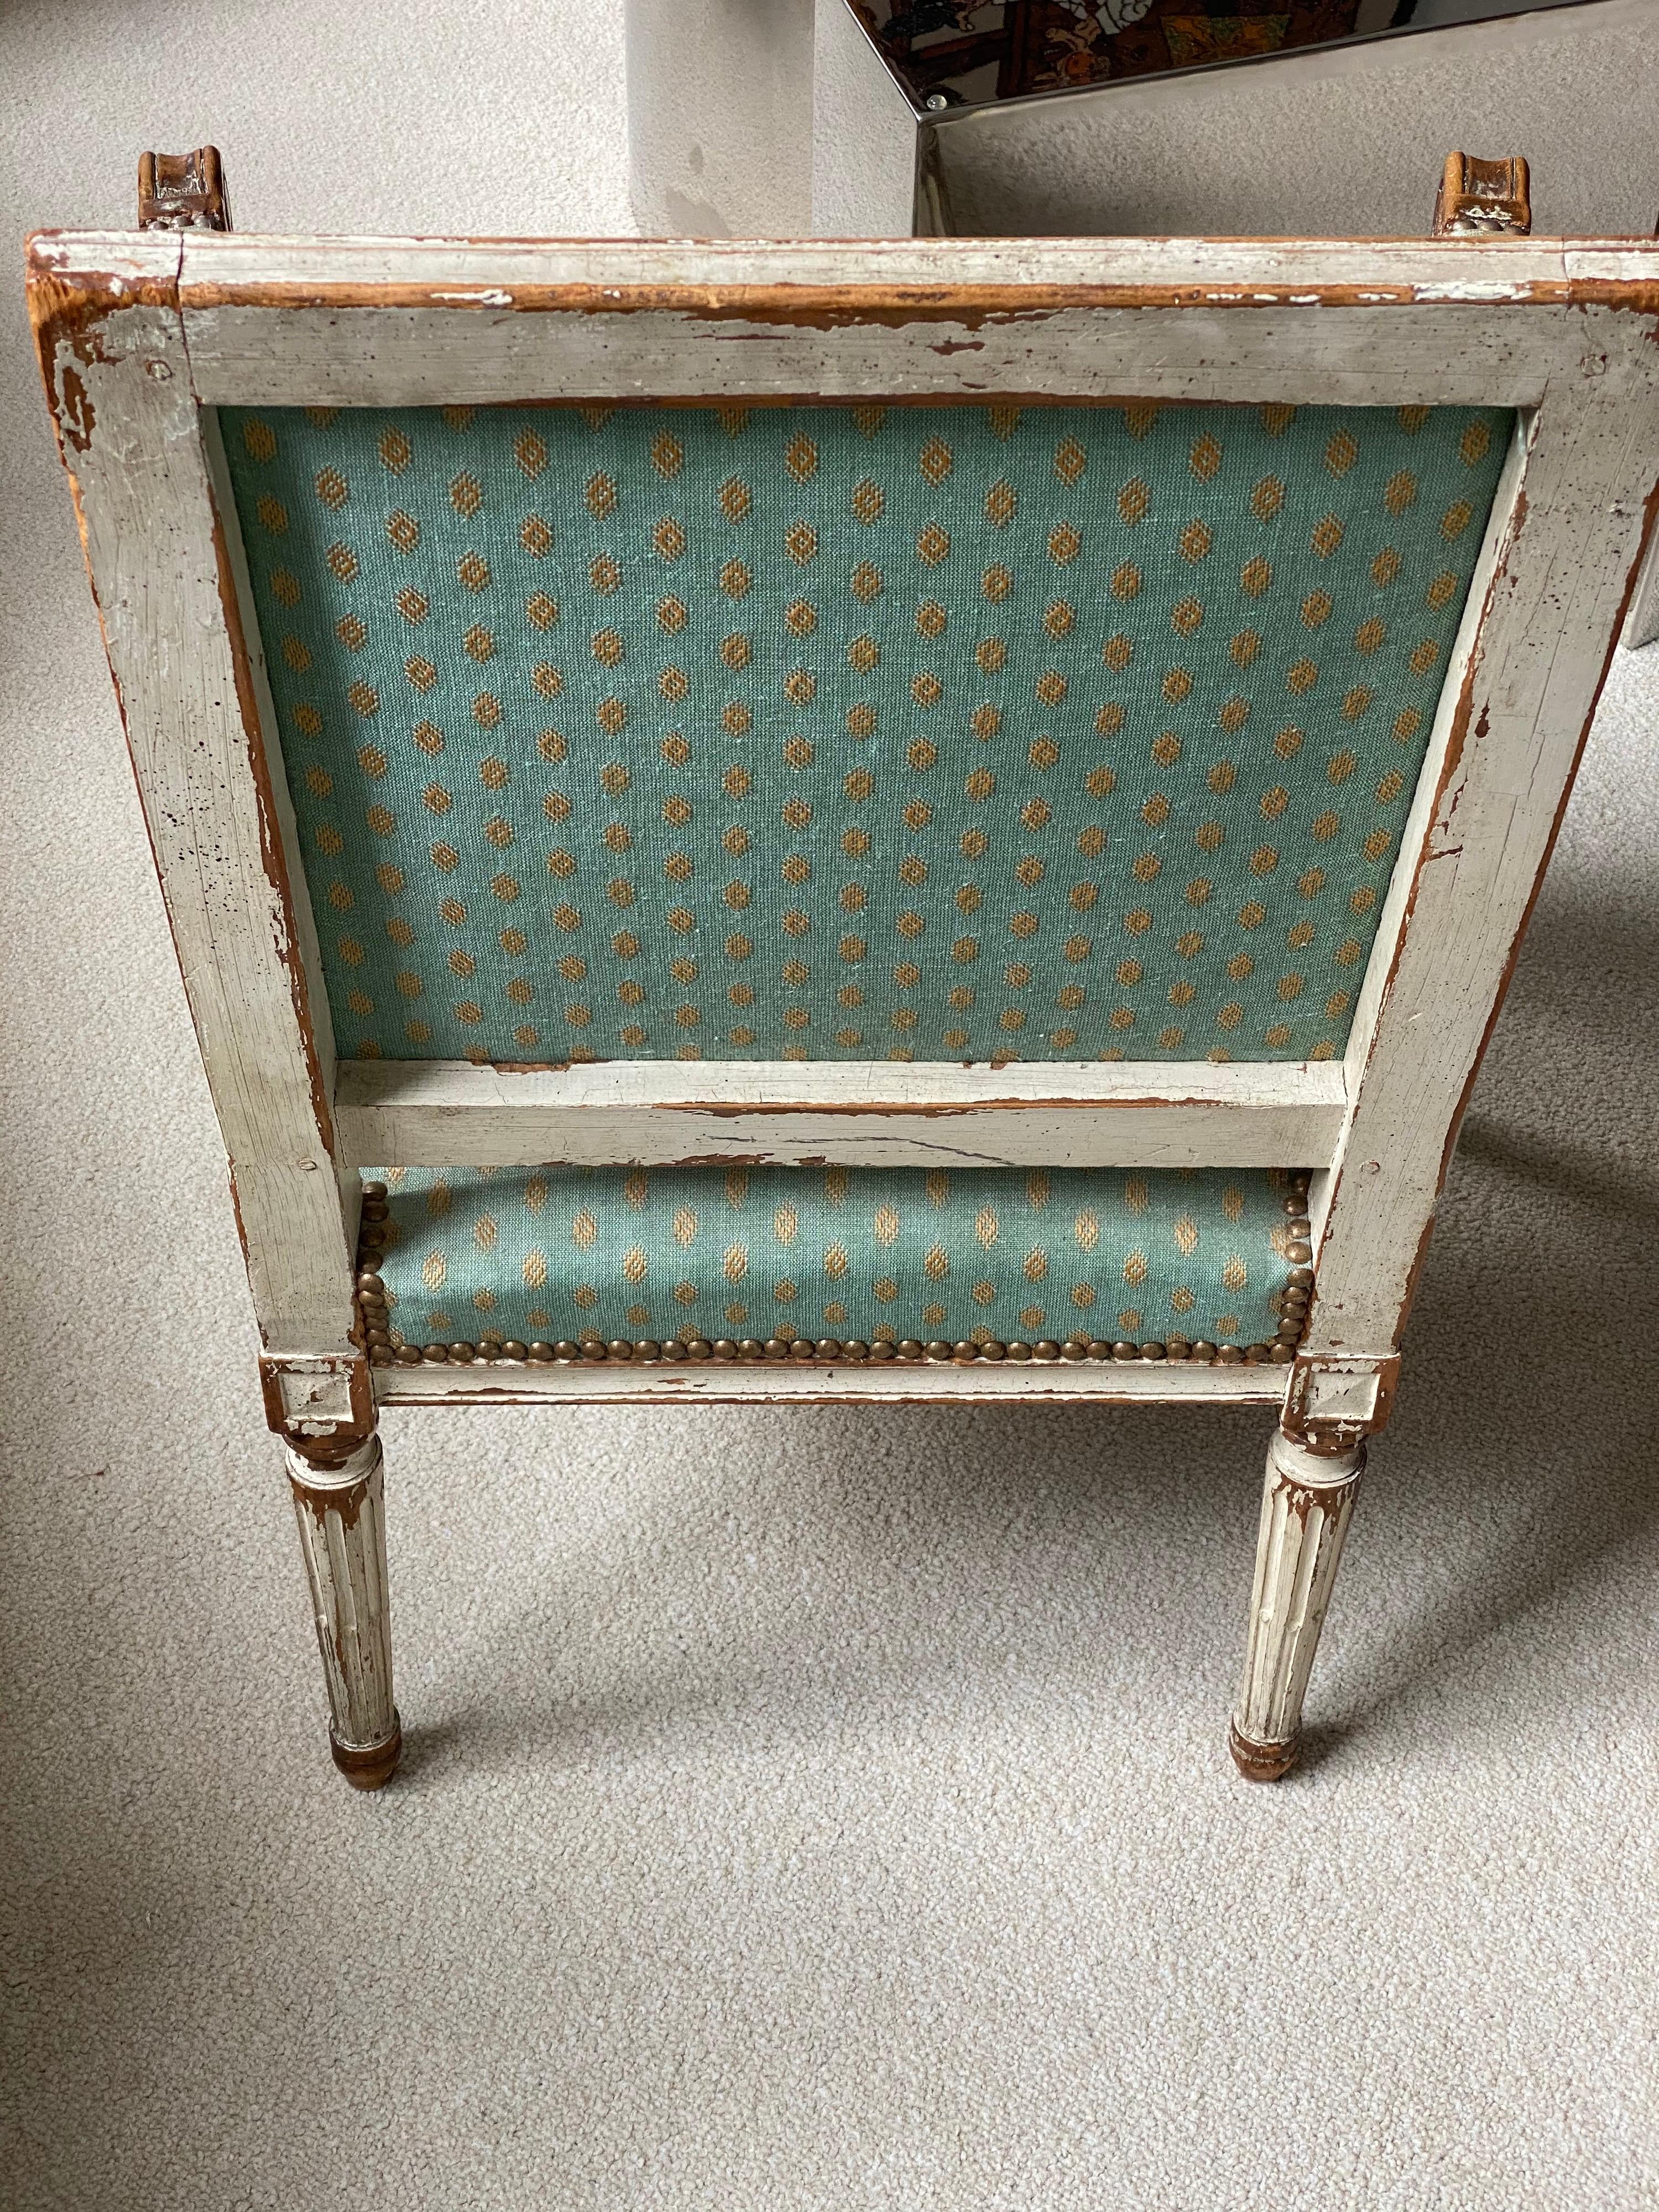 Authentic Pair of French Armchair, Louis XVI Period, 1775-1790 For Sale 11